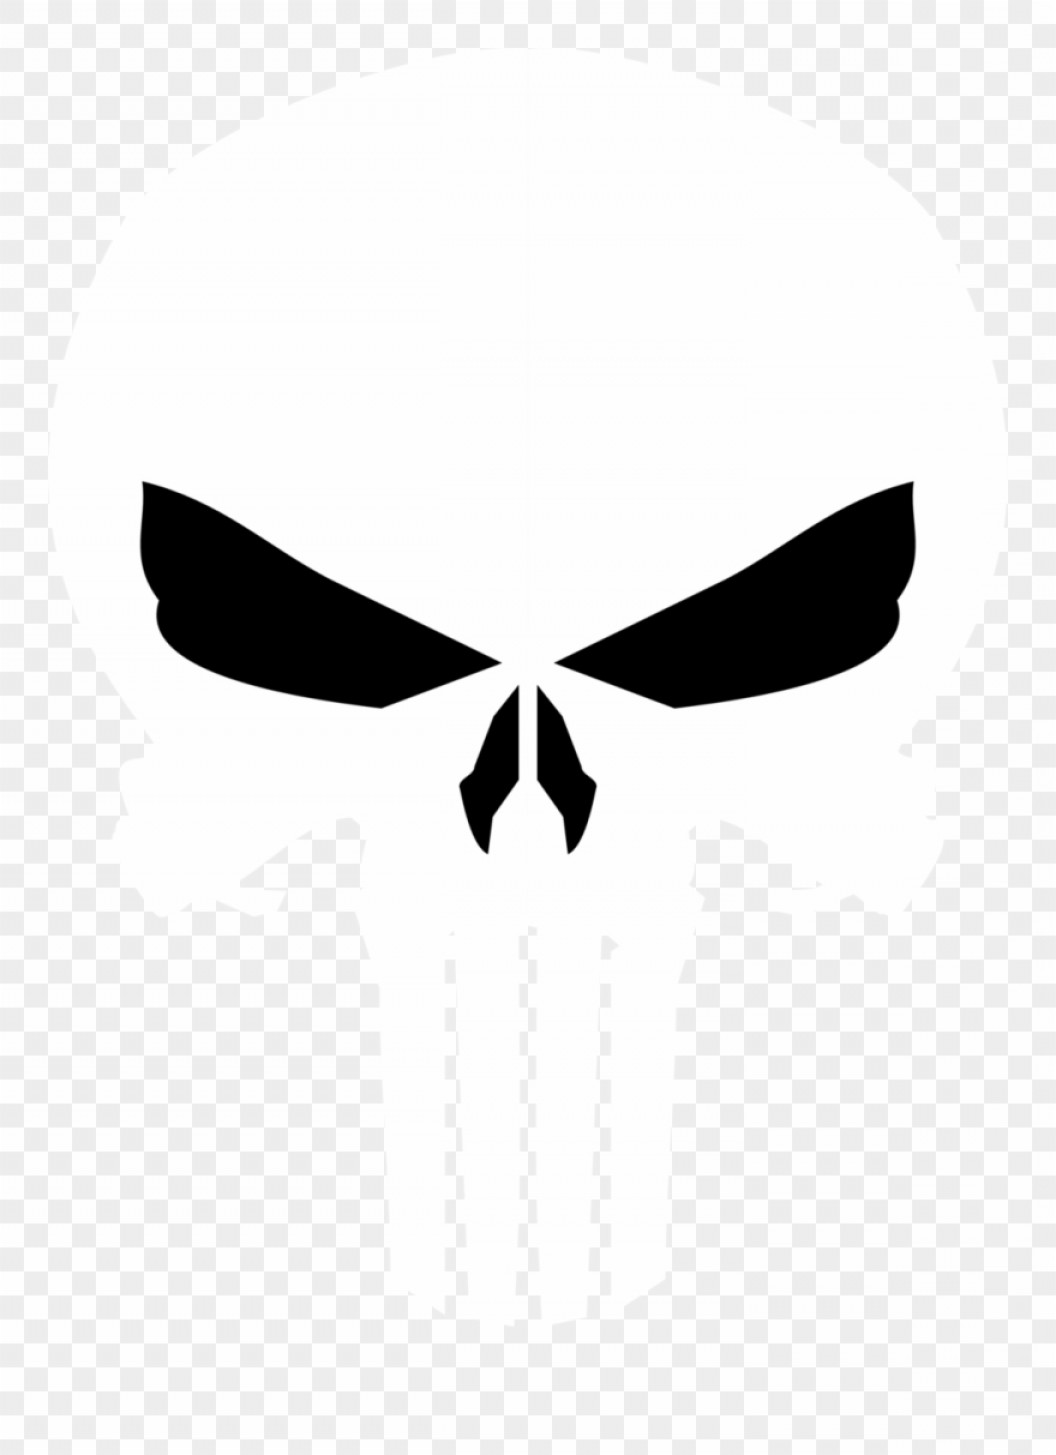 Punisher Logo Vector at GetDrawings | Free download